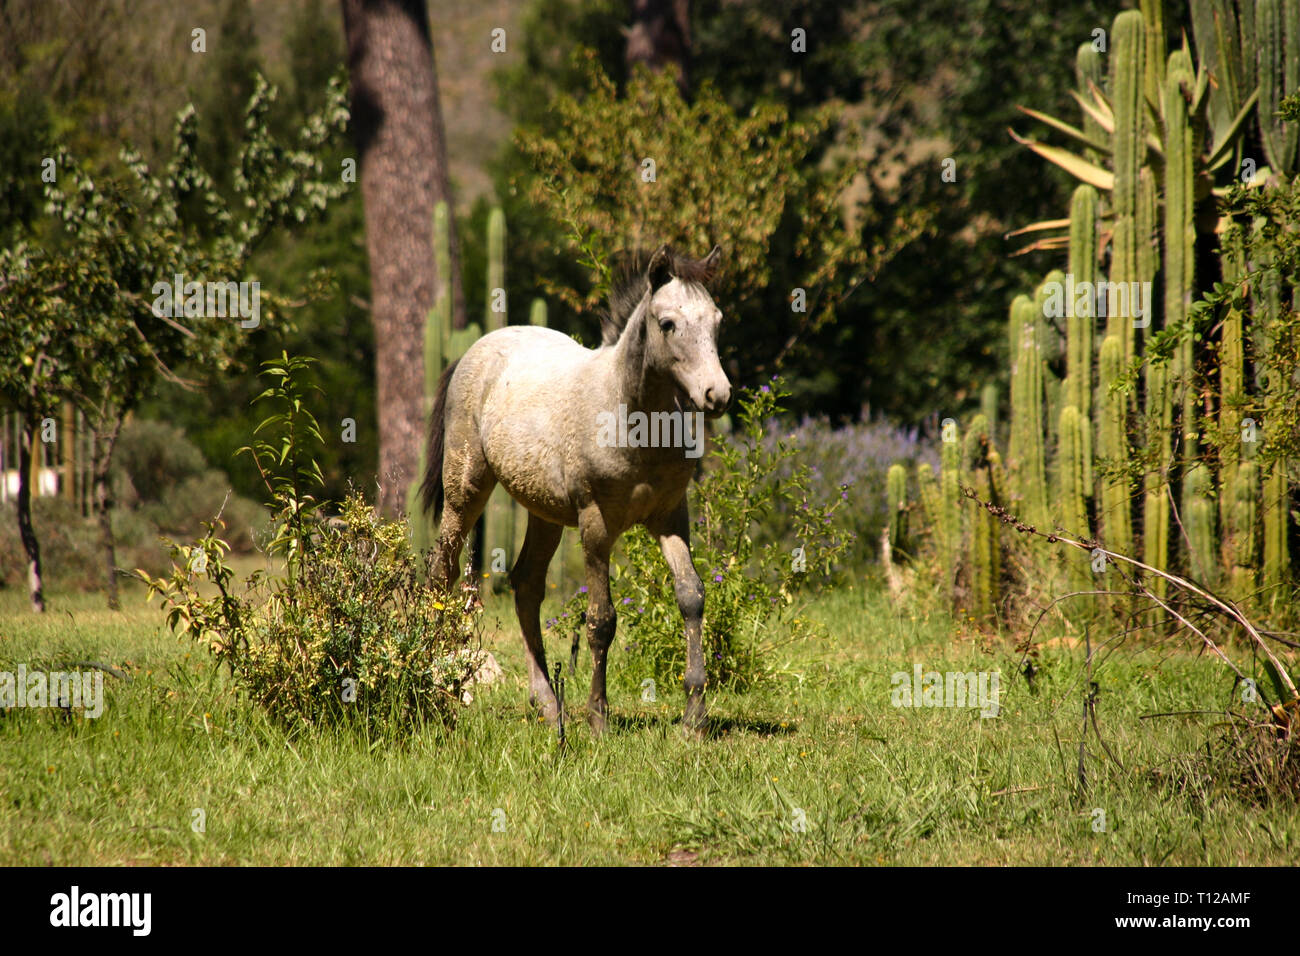 Young horse adventuring in the bushes Stock Photo